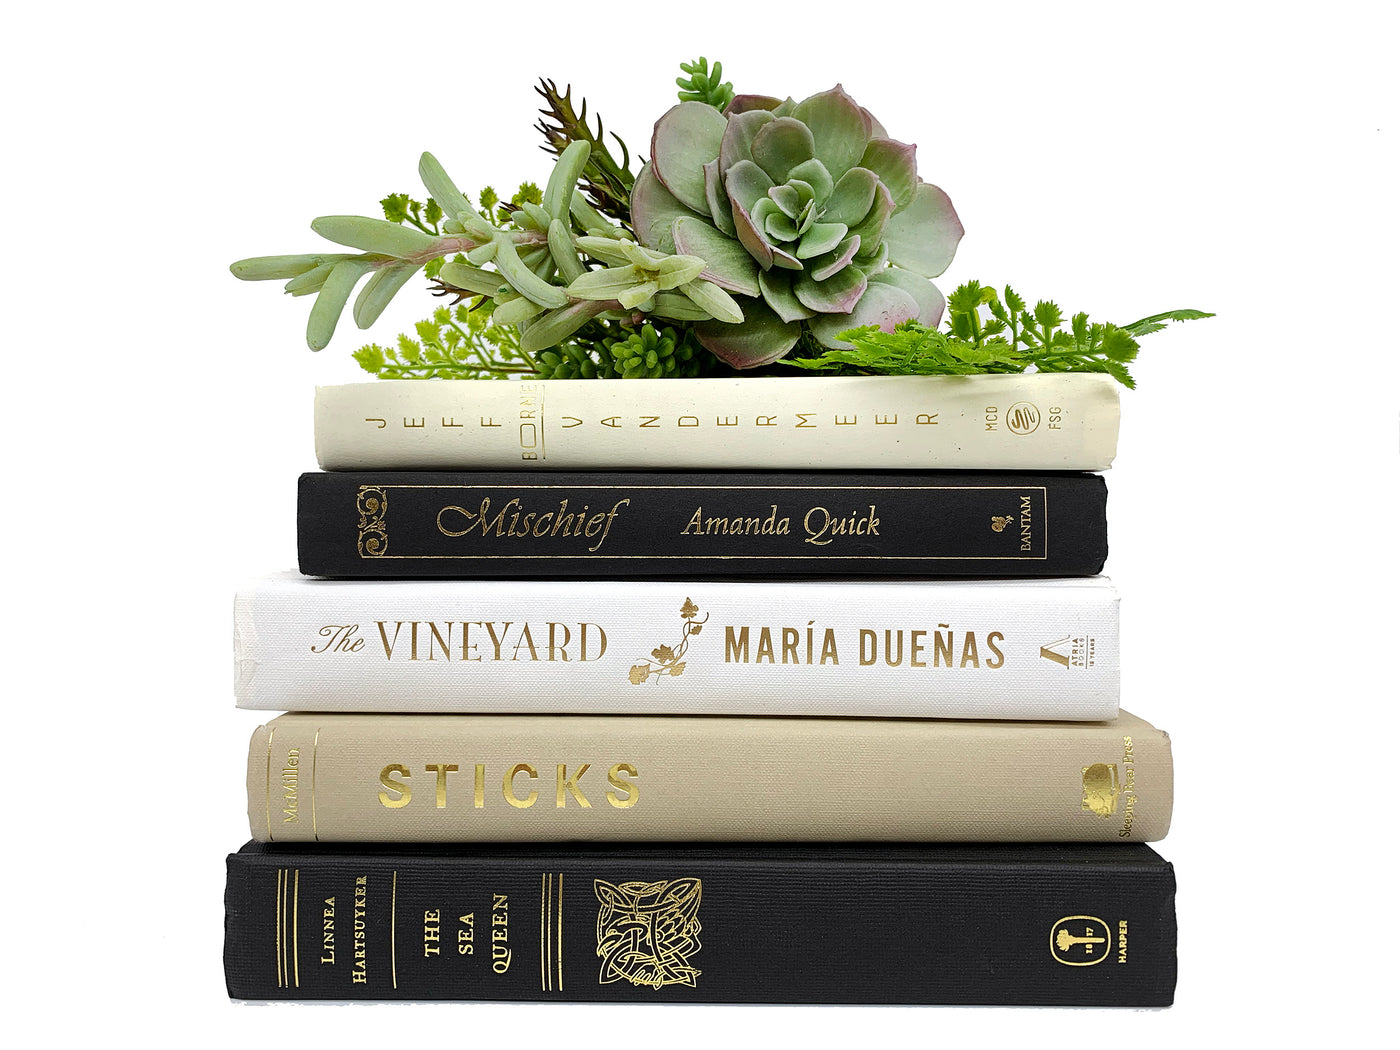 Tan Book Stack Books for Staging Decorative Books Sets 